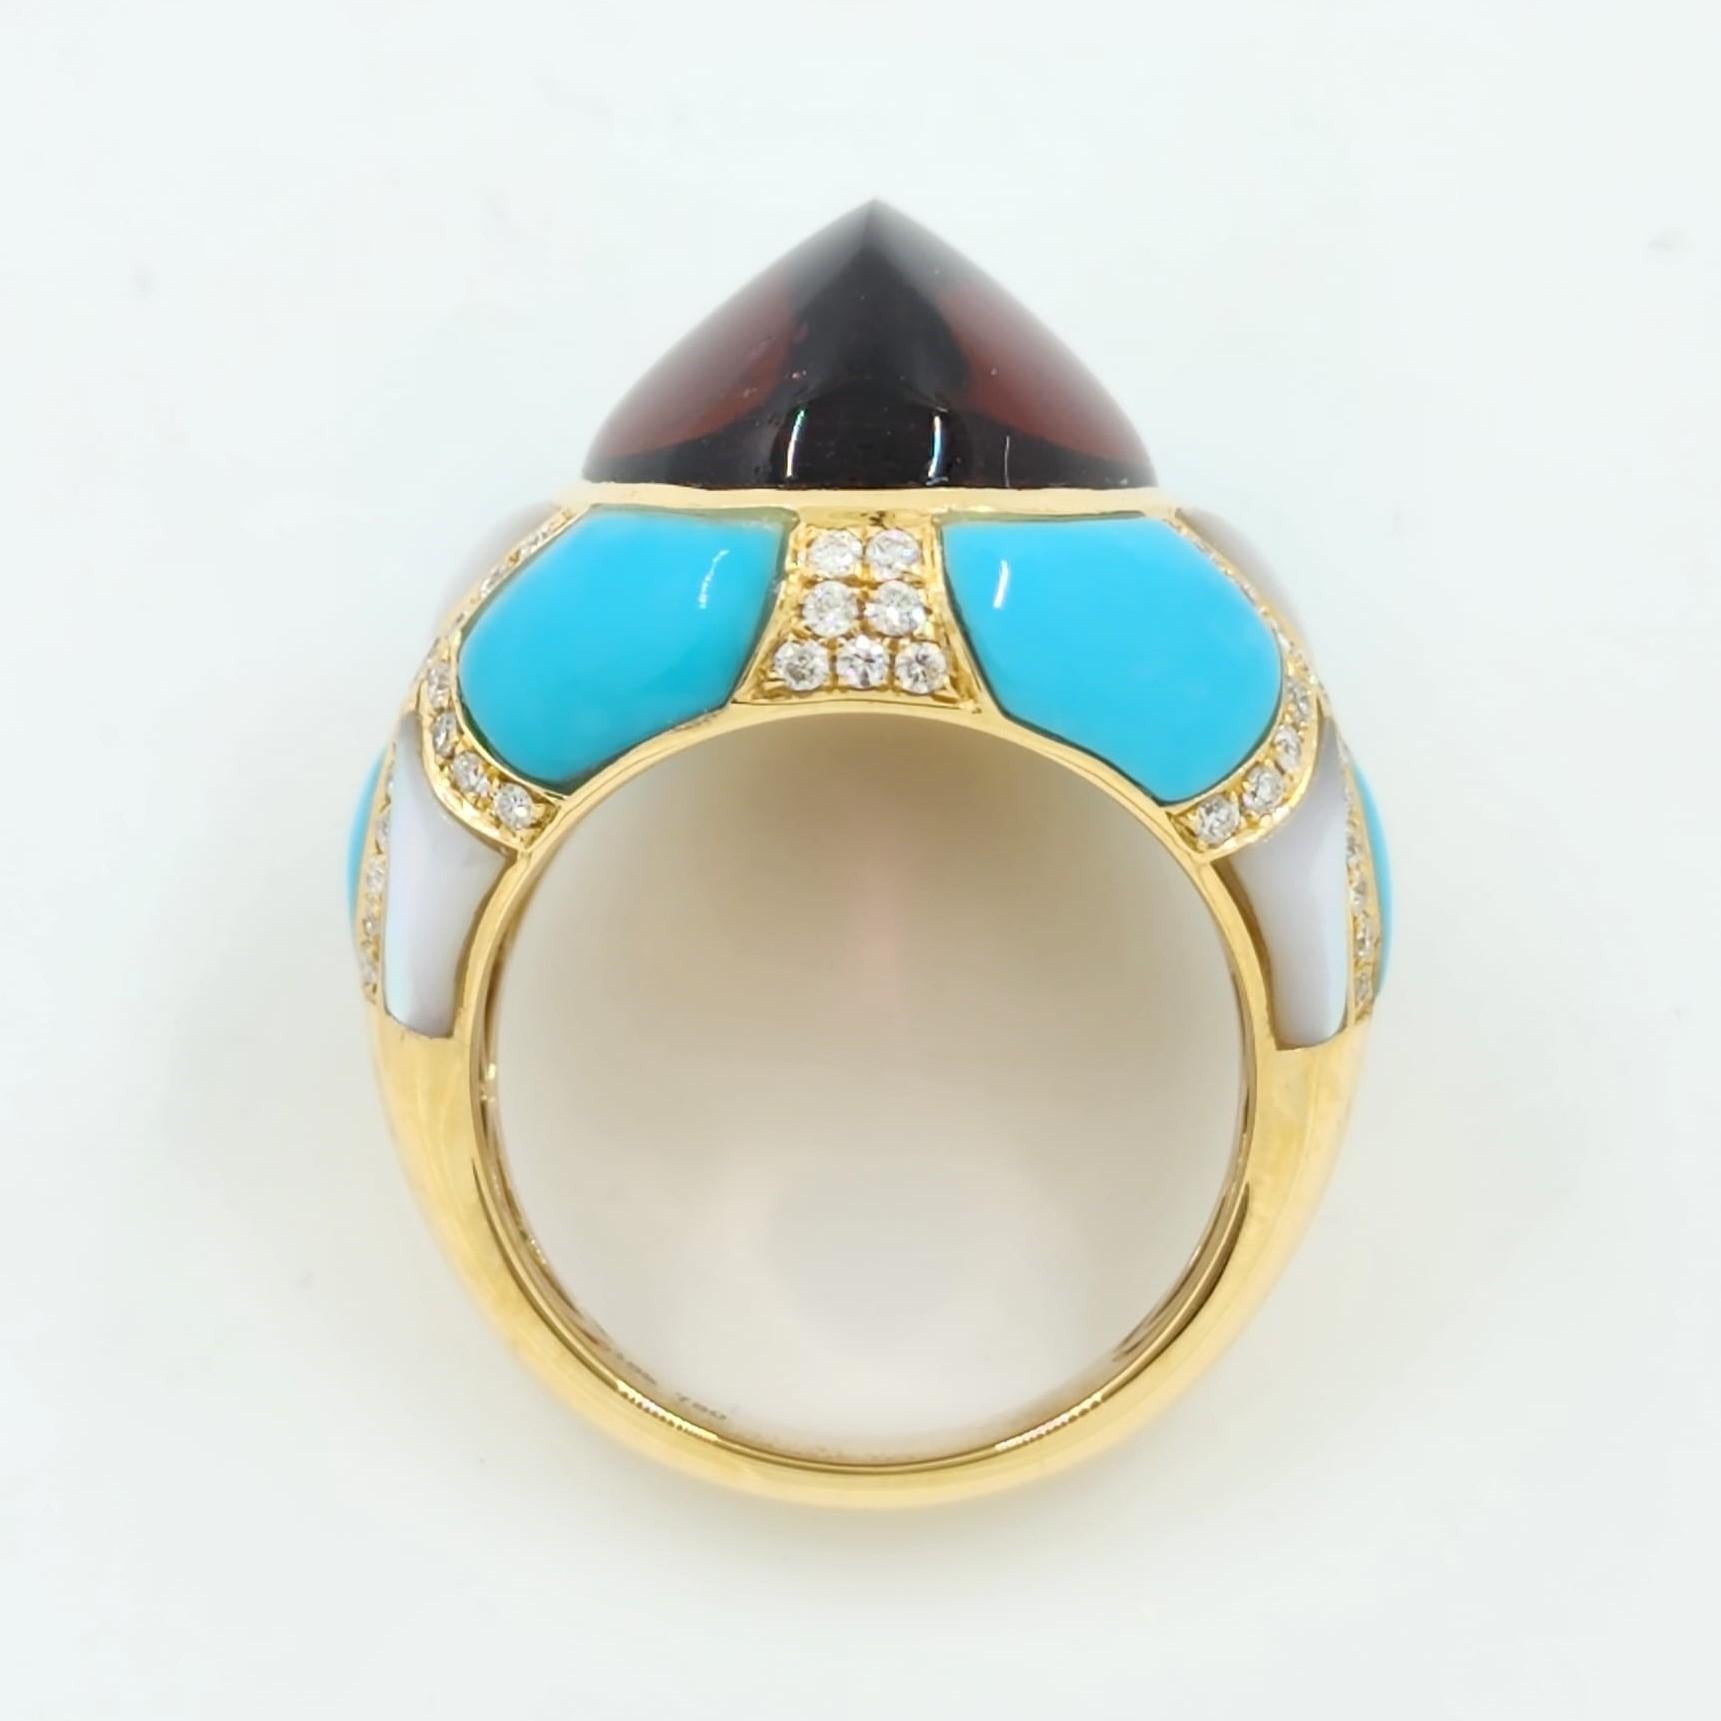 Women's Tourmaline Turquoise Mother-of-Pearl Diamond Cocktail Ring in 18k Yellow Gold